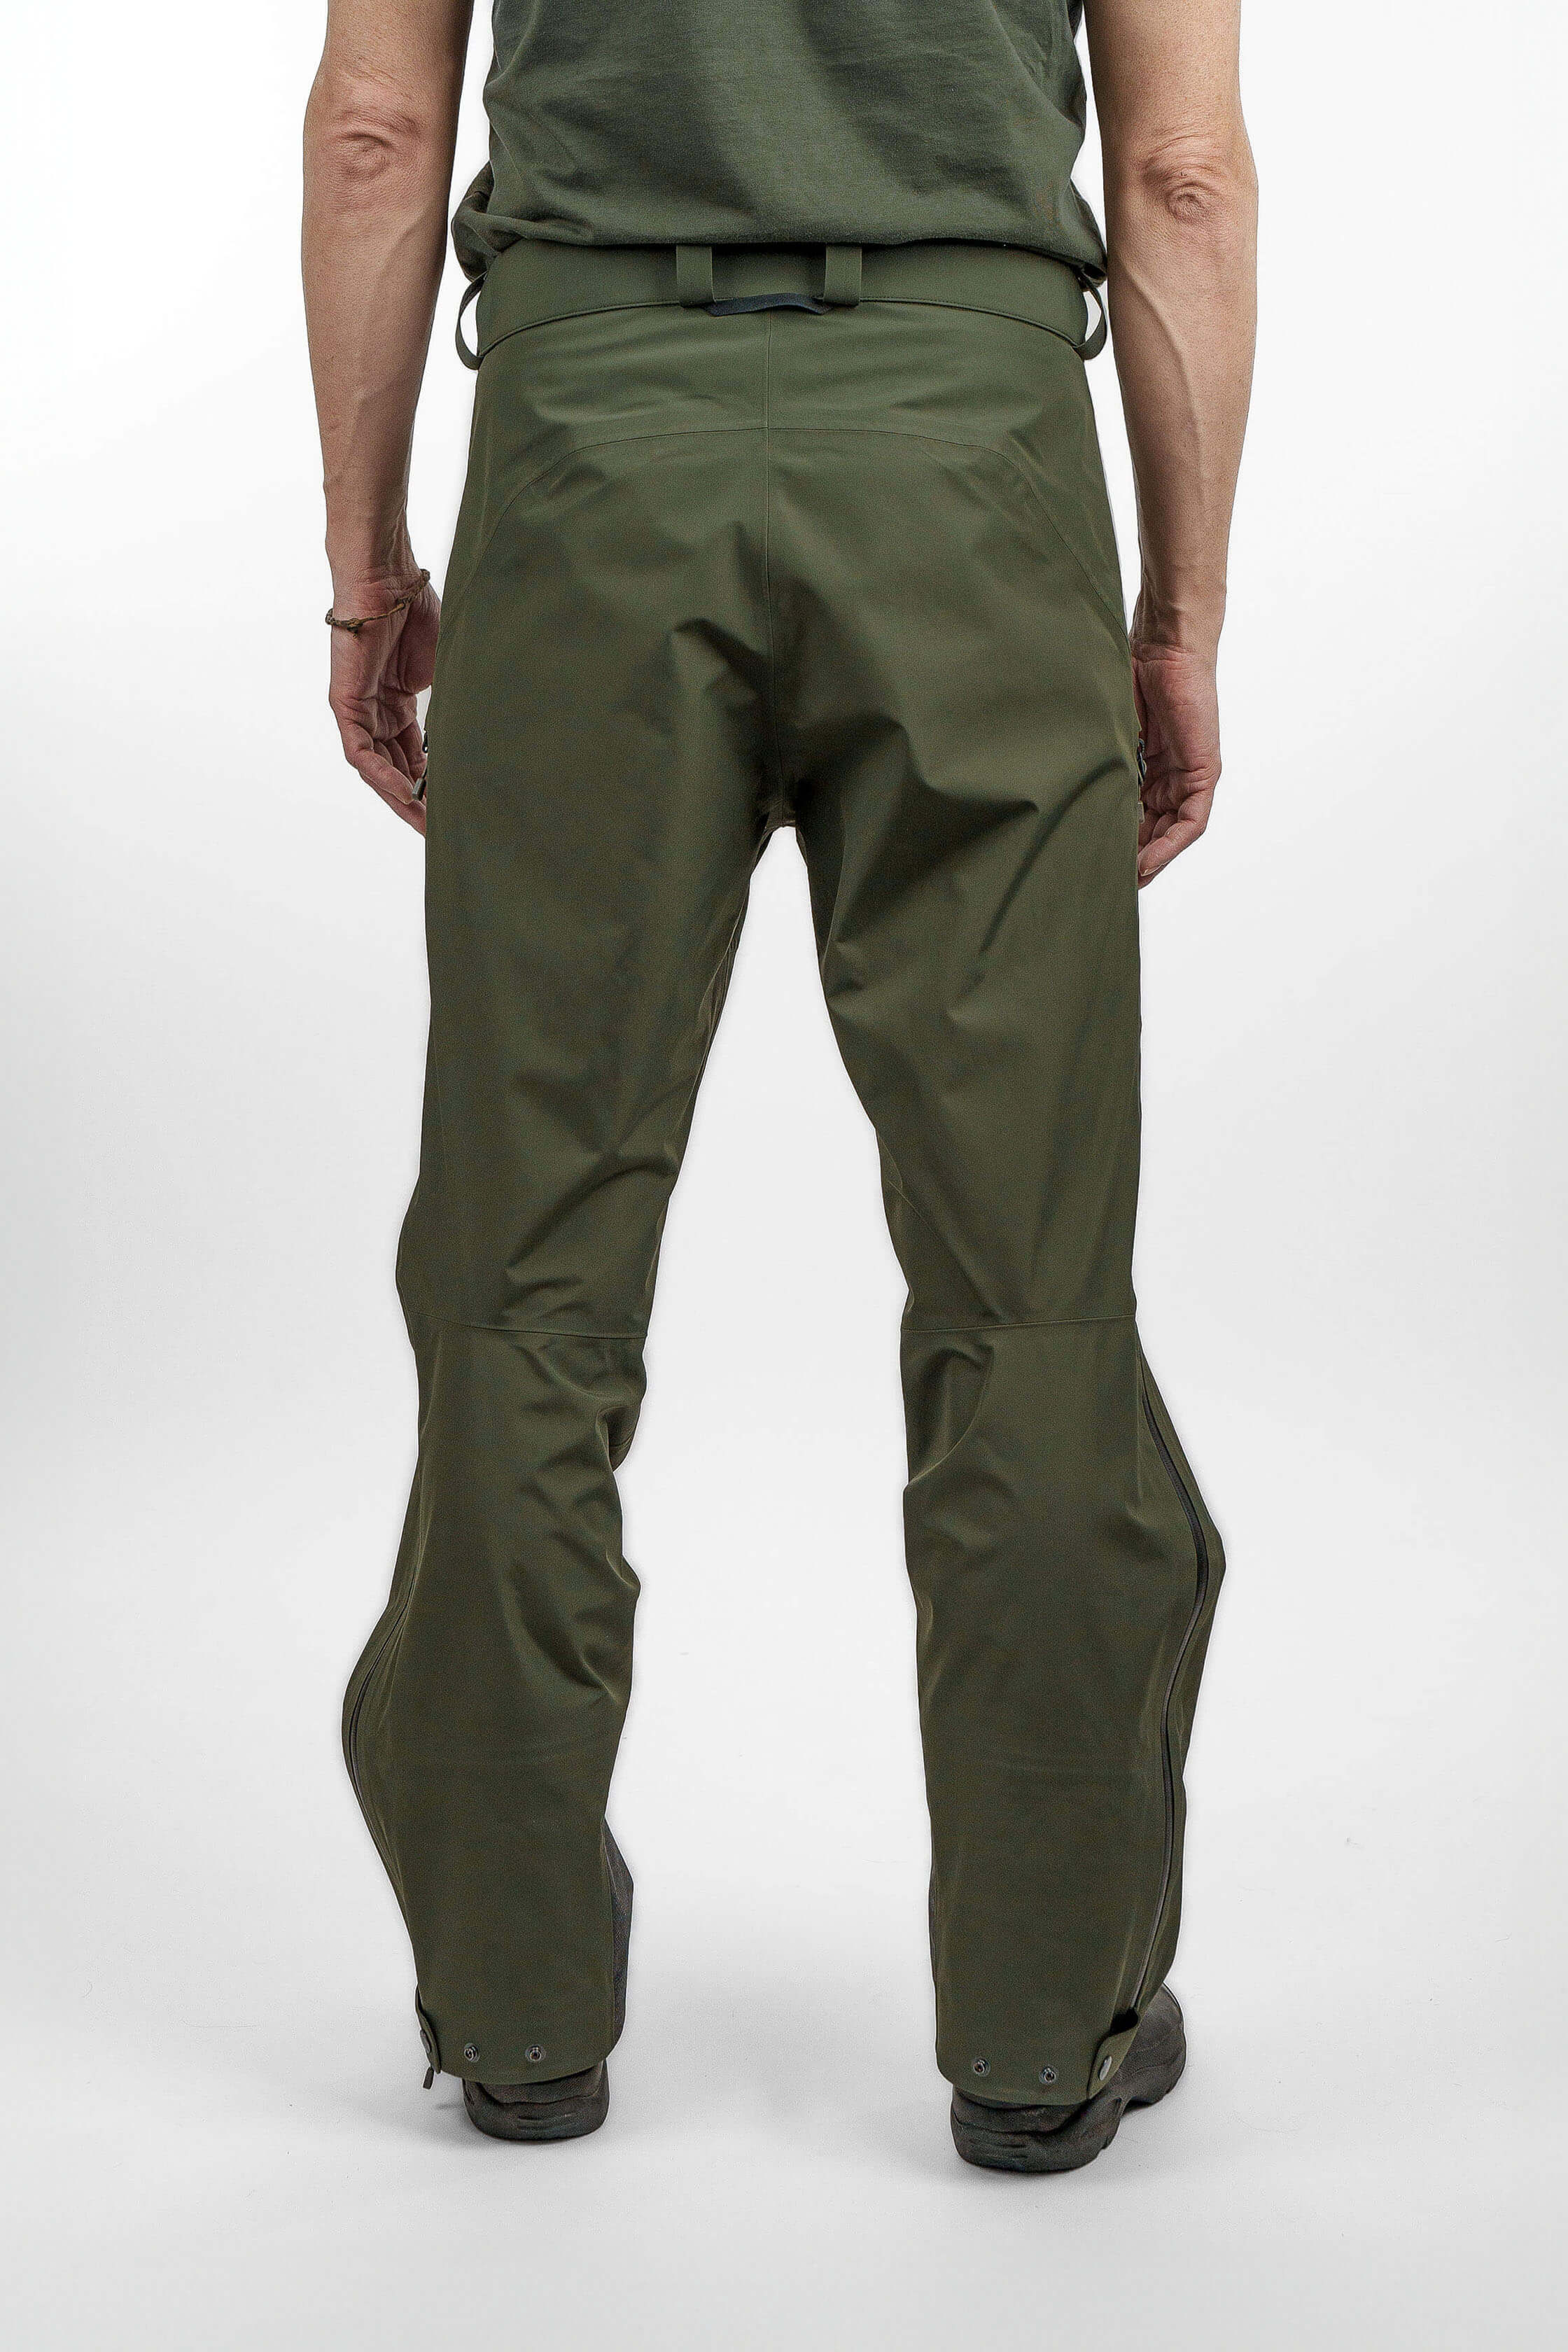 Green hardshell pants in unisex sizing - back view of the Arctic Legacy Nuka Elements 3 layer Pants#color_dusty-olive